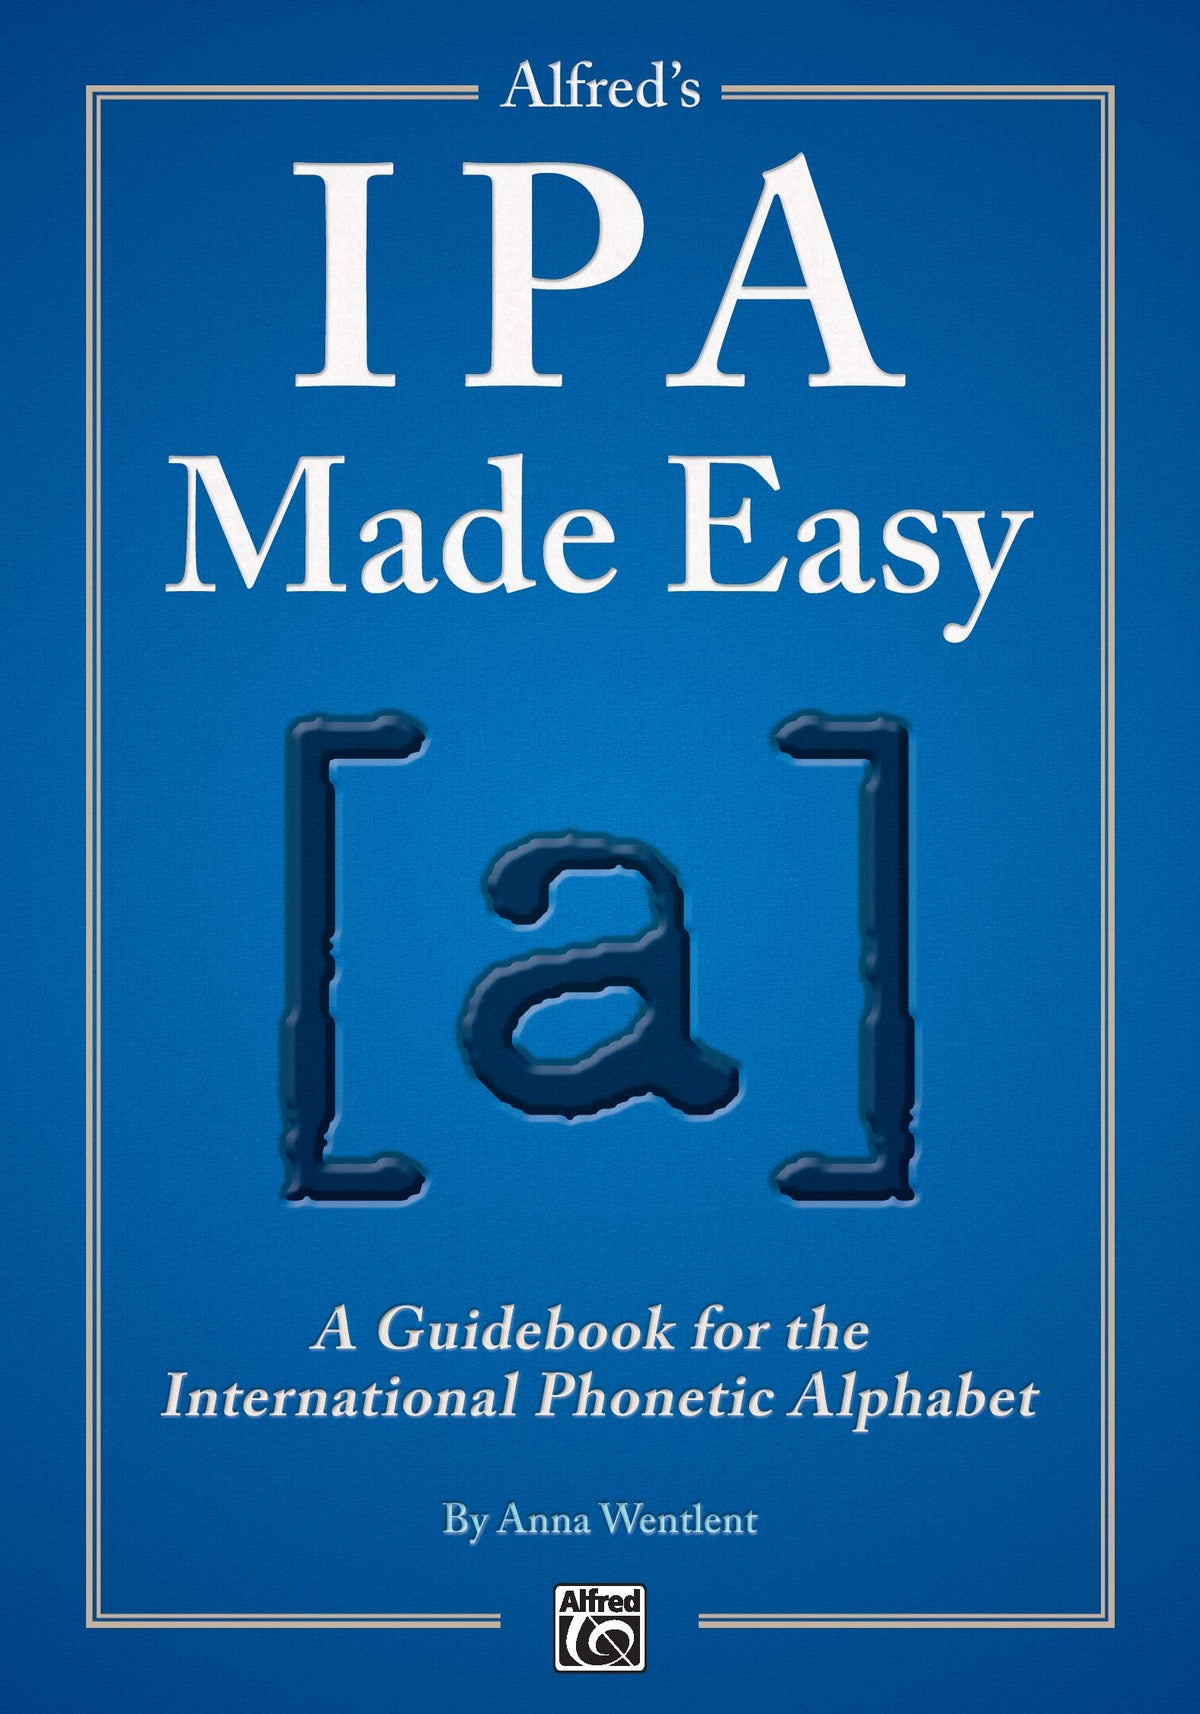 IPA Made Easy | A guidebook for the International Phonetic Alphabet